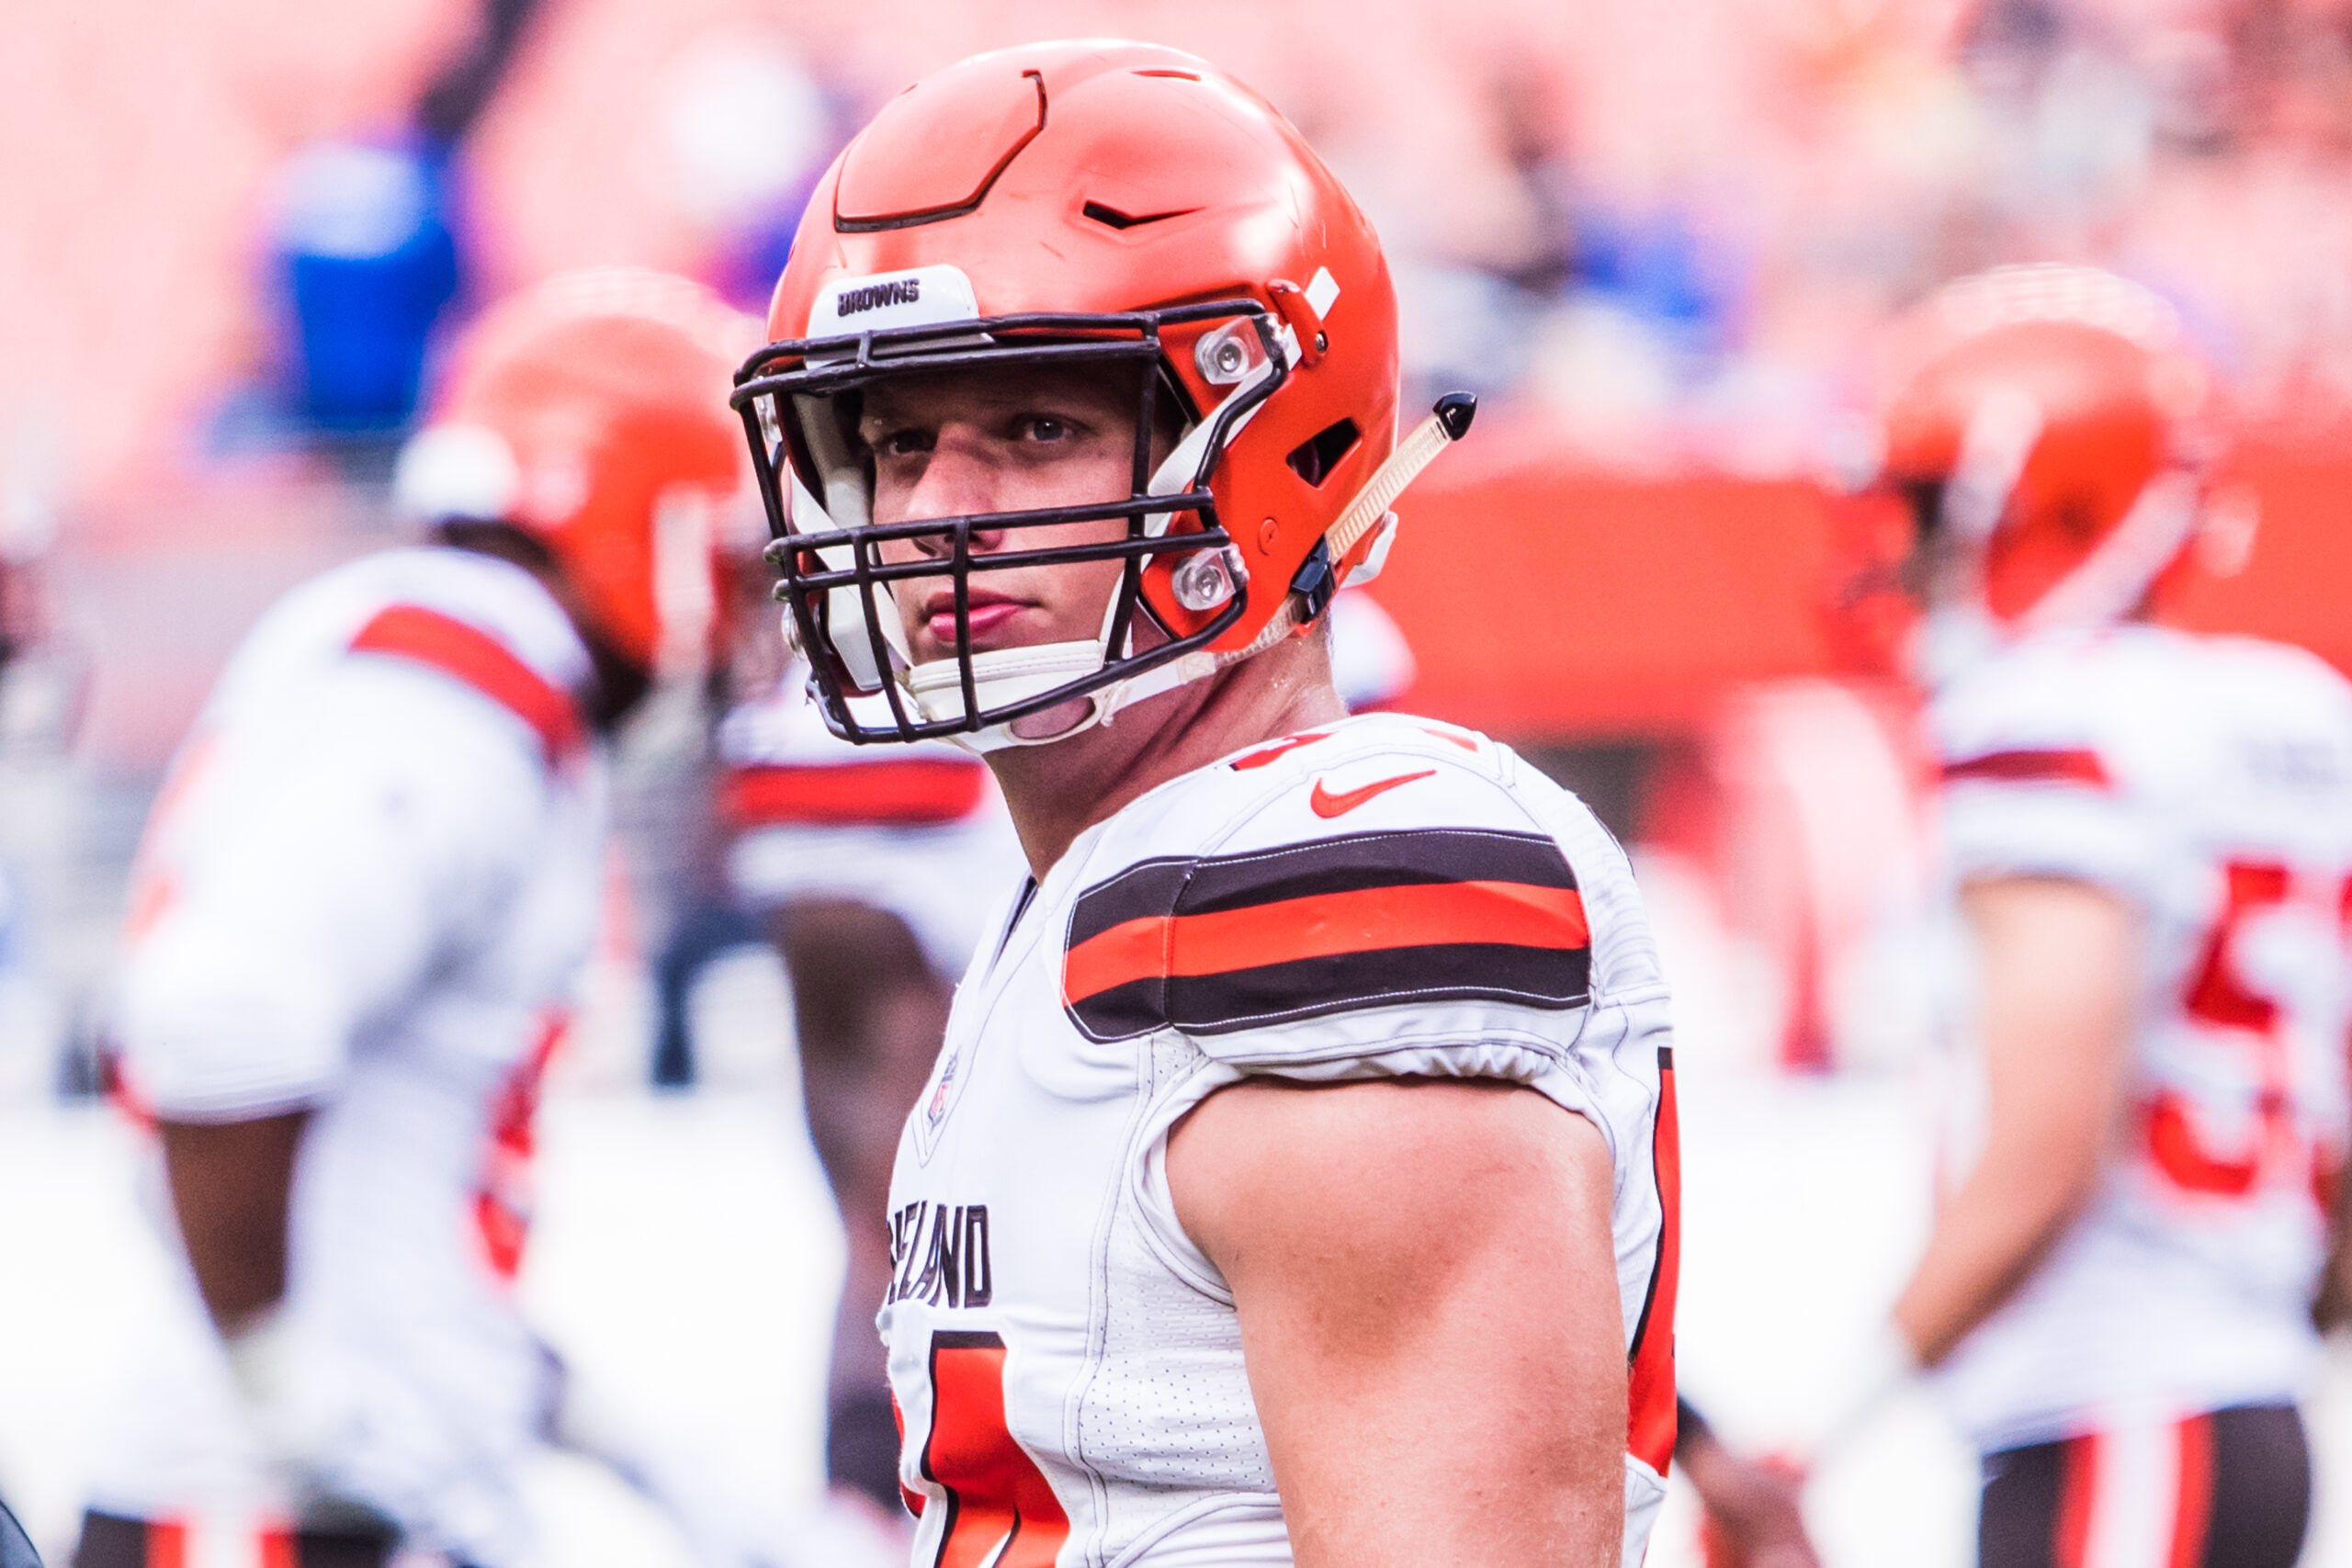 Carl Nassib playing for the Cleveland Browns during a game in 2018.